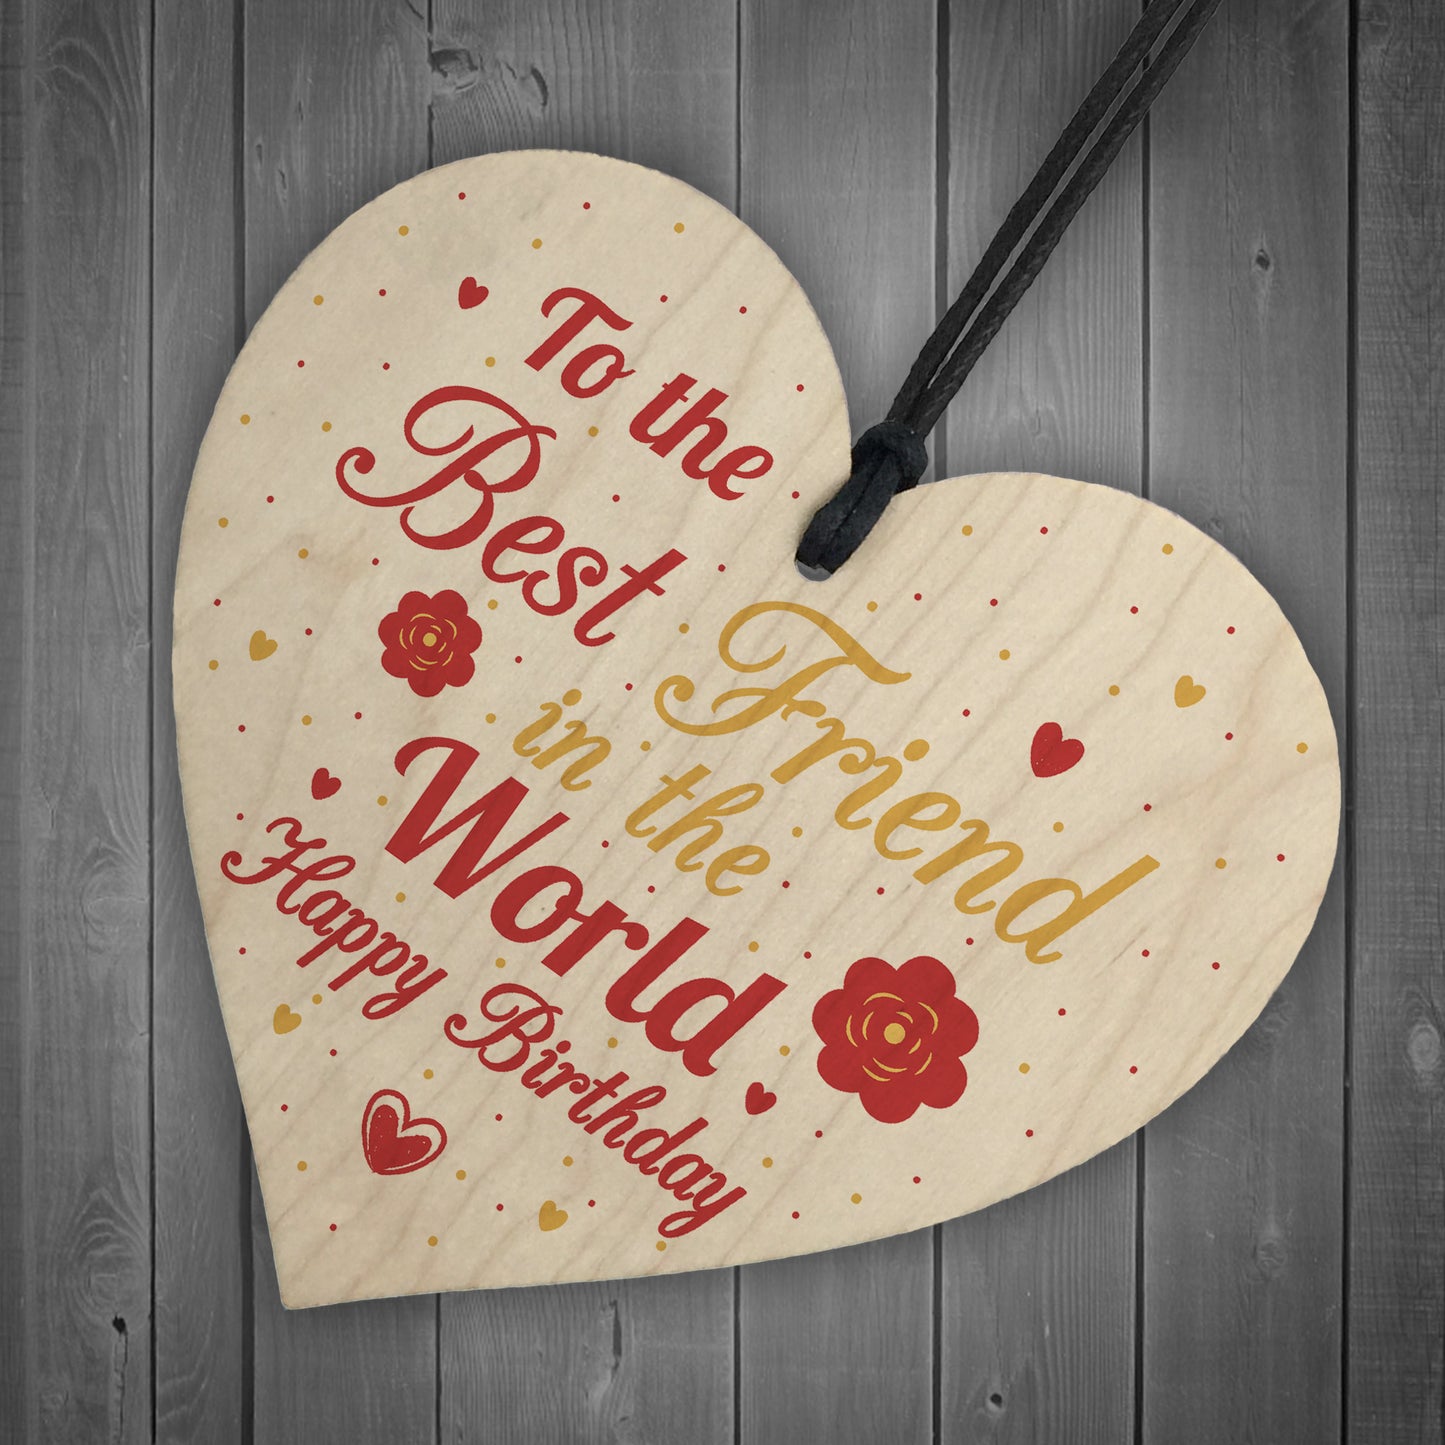 Happy Birthday Best Friend Gift Wood Heart Sign Thank You Plaque